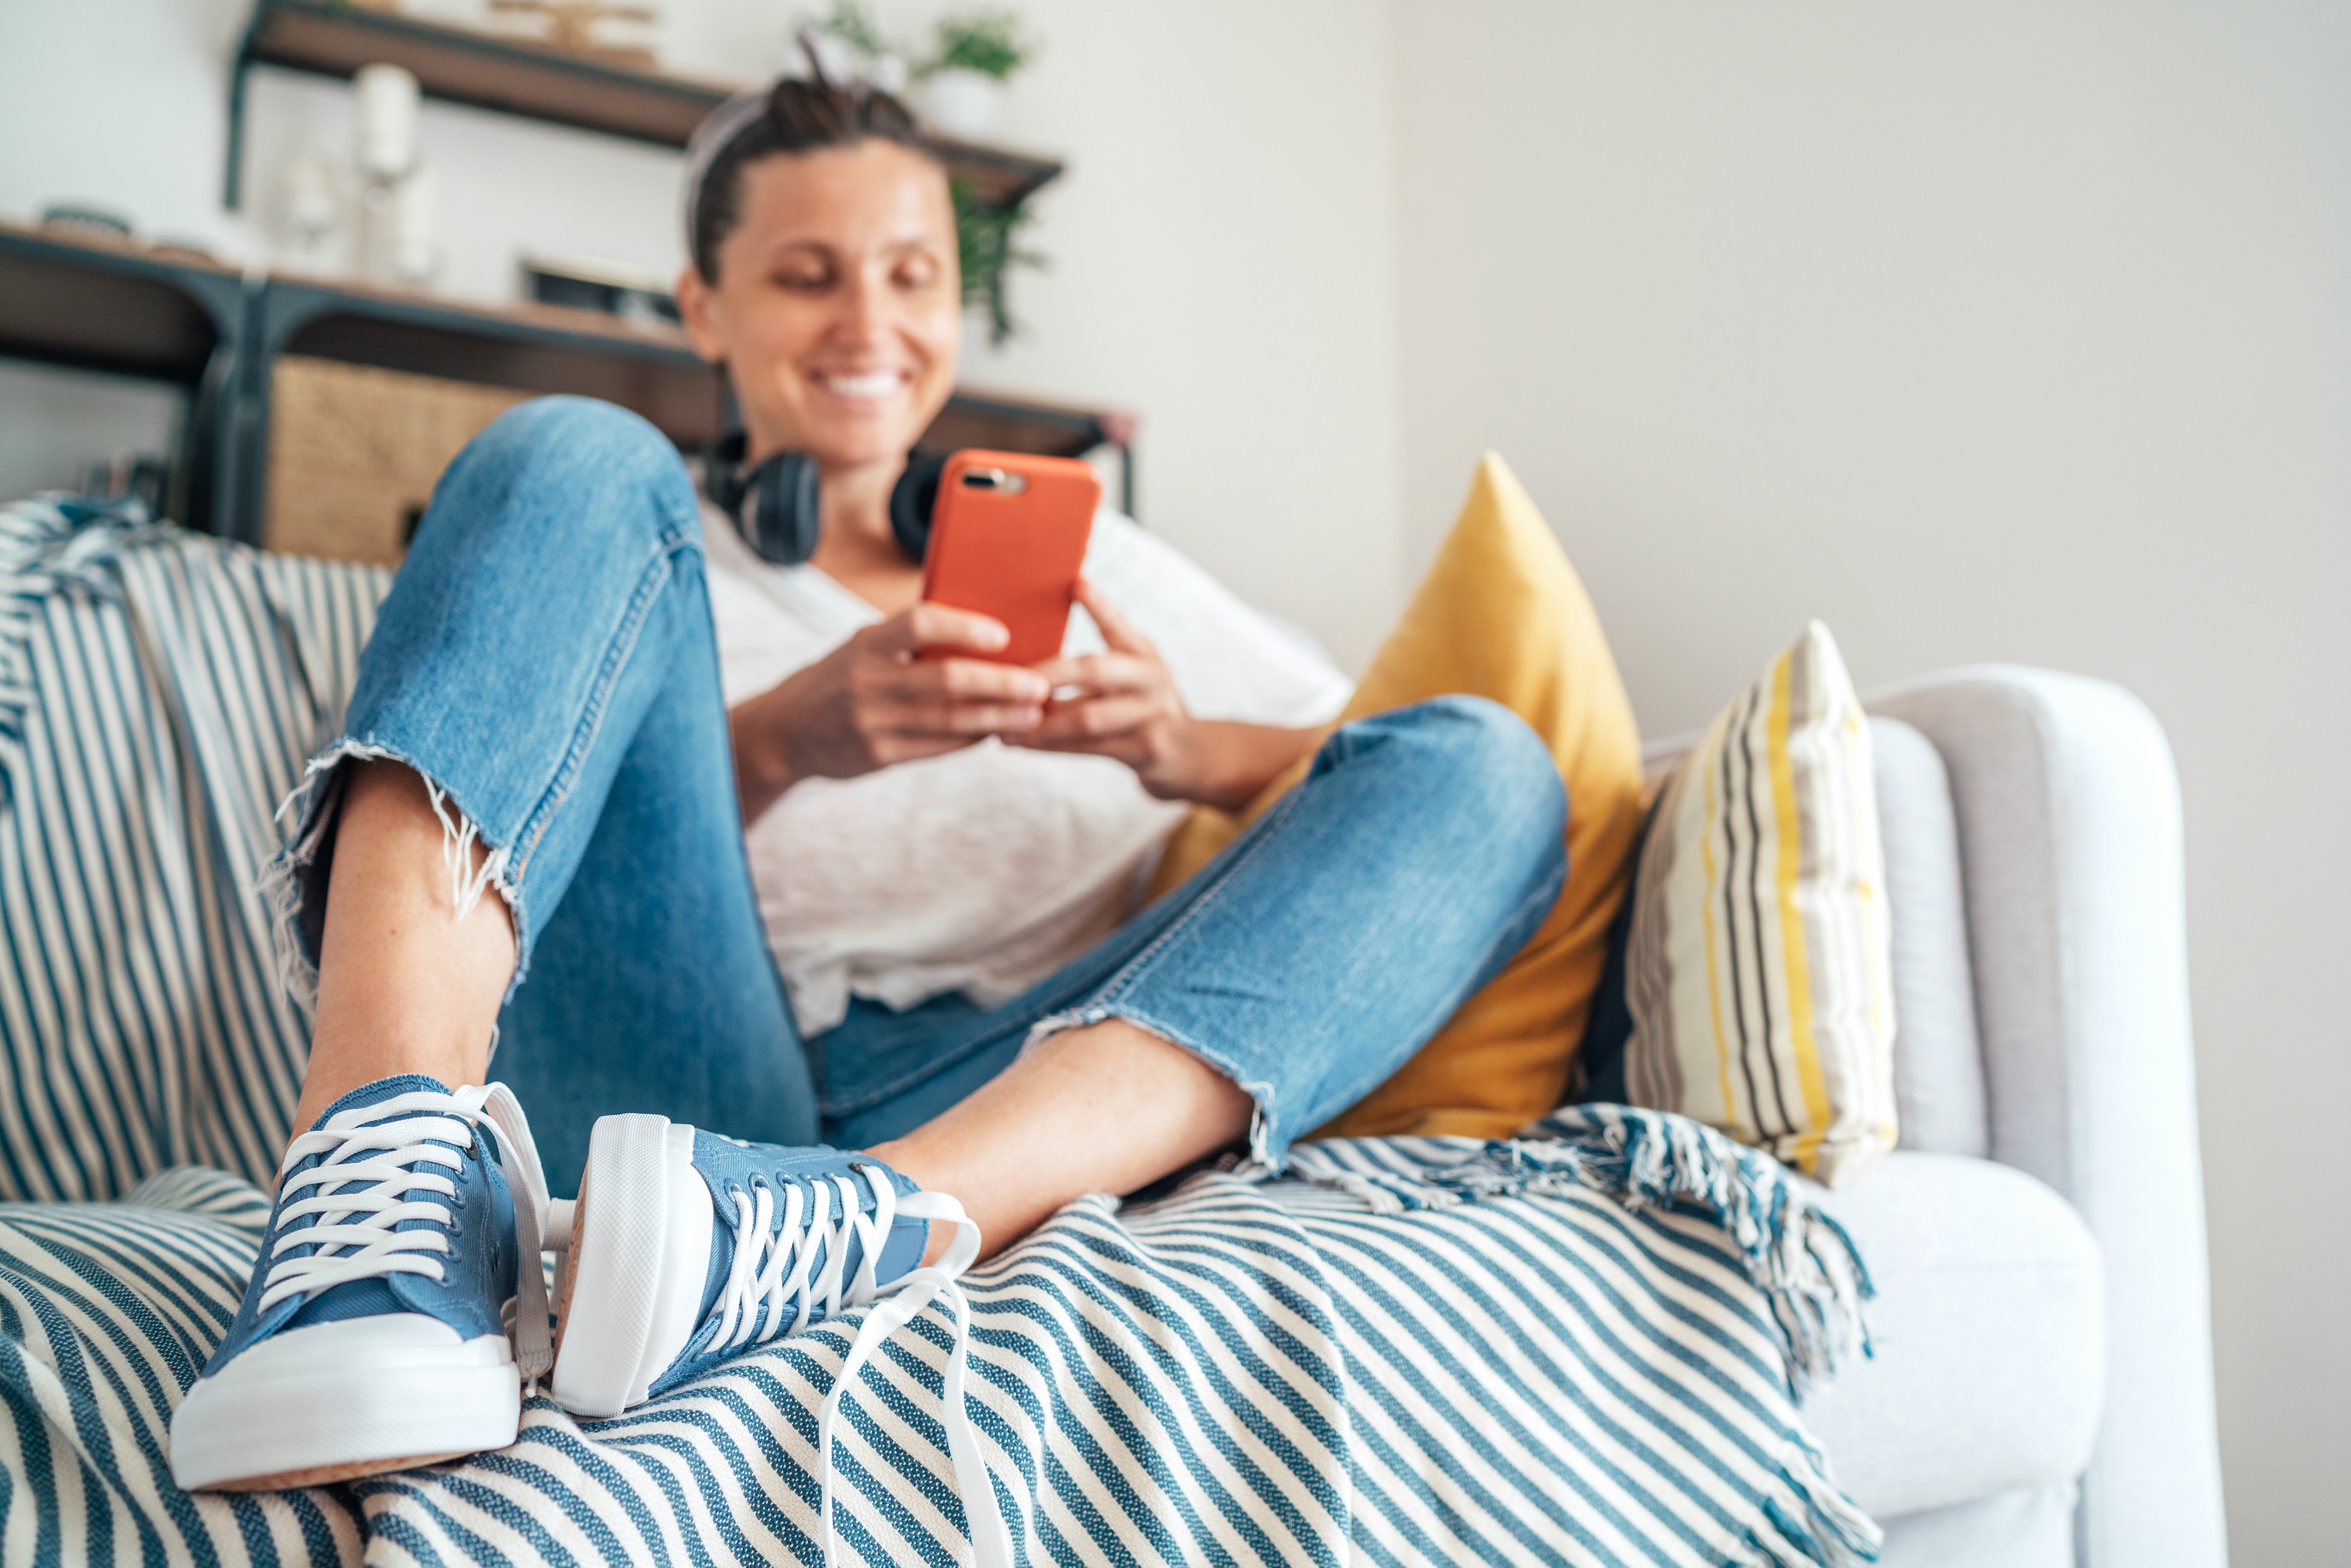 A woman is sitting comfortably on a couch, wearing ripped jeans, sneakers, a white top, and headphones around her neck, smiling while looking at her phone